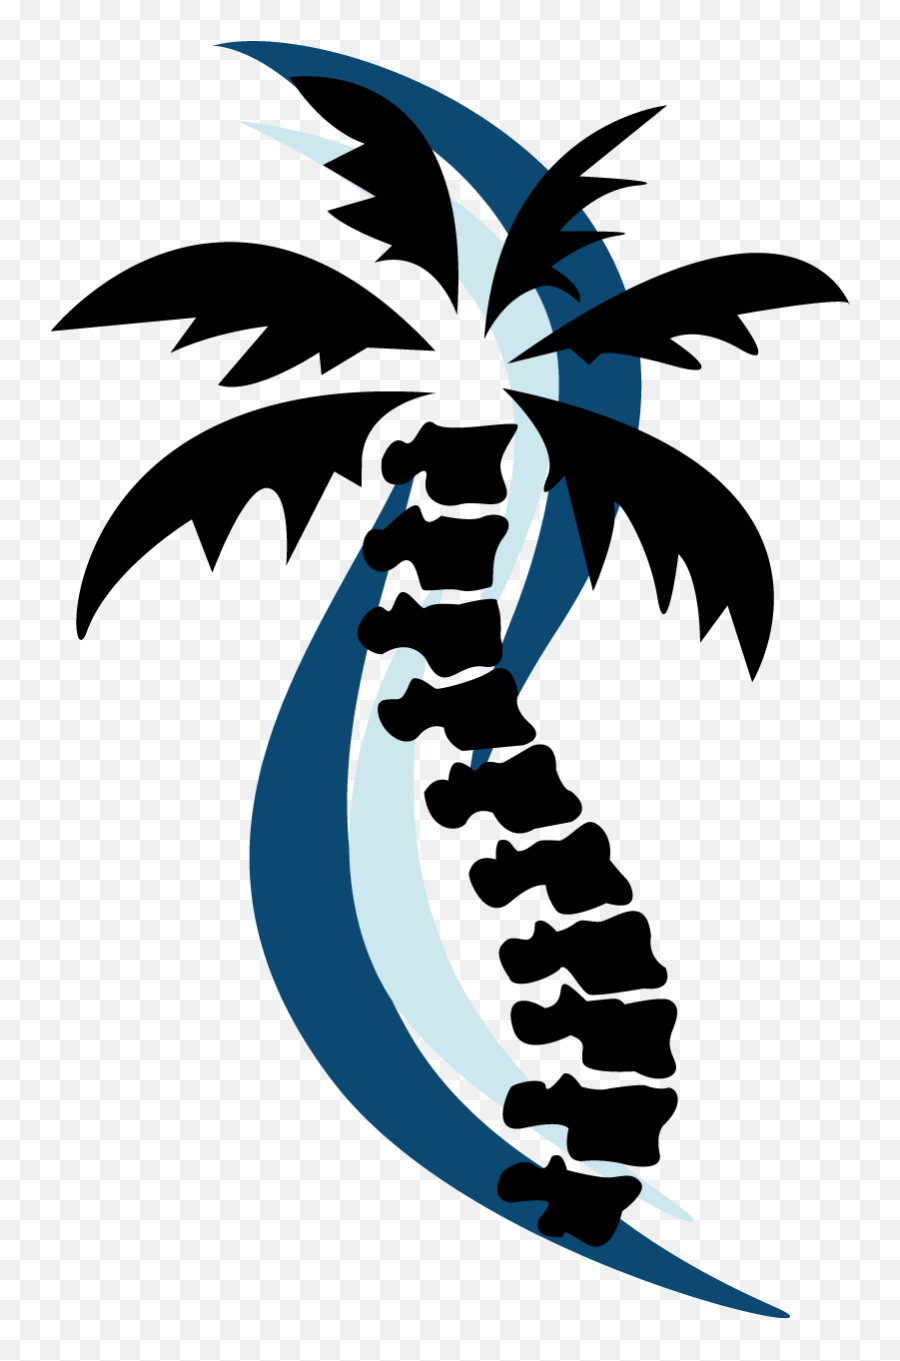 Goodland Chiropractic - Goodland Chiropractic Png,Chiropractor Icon